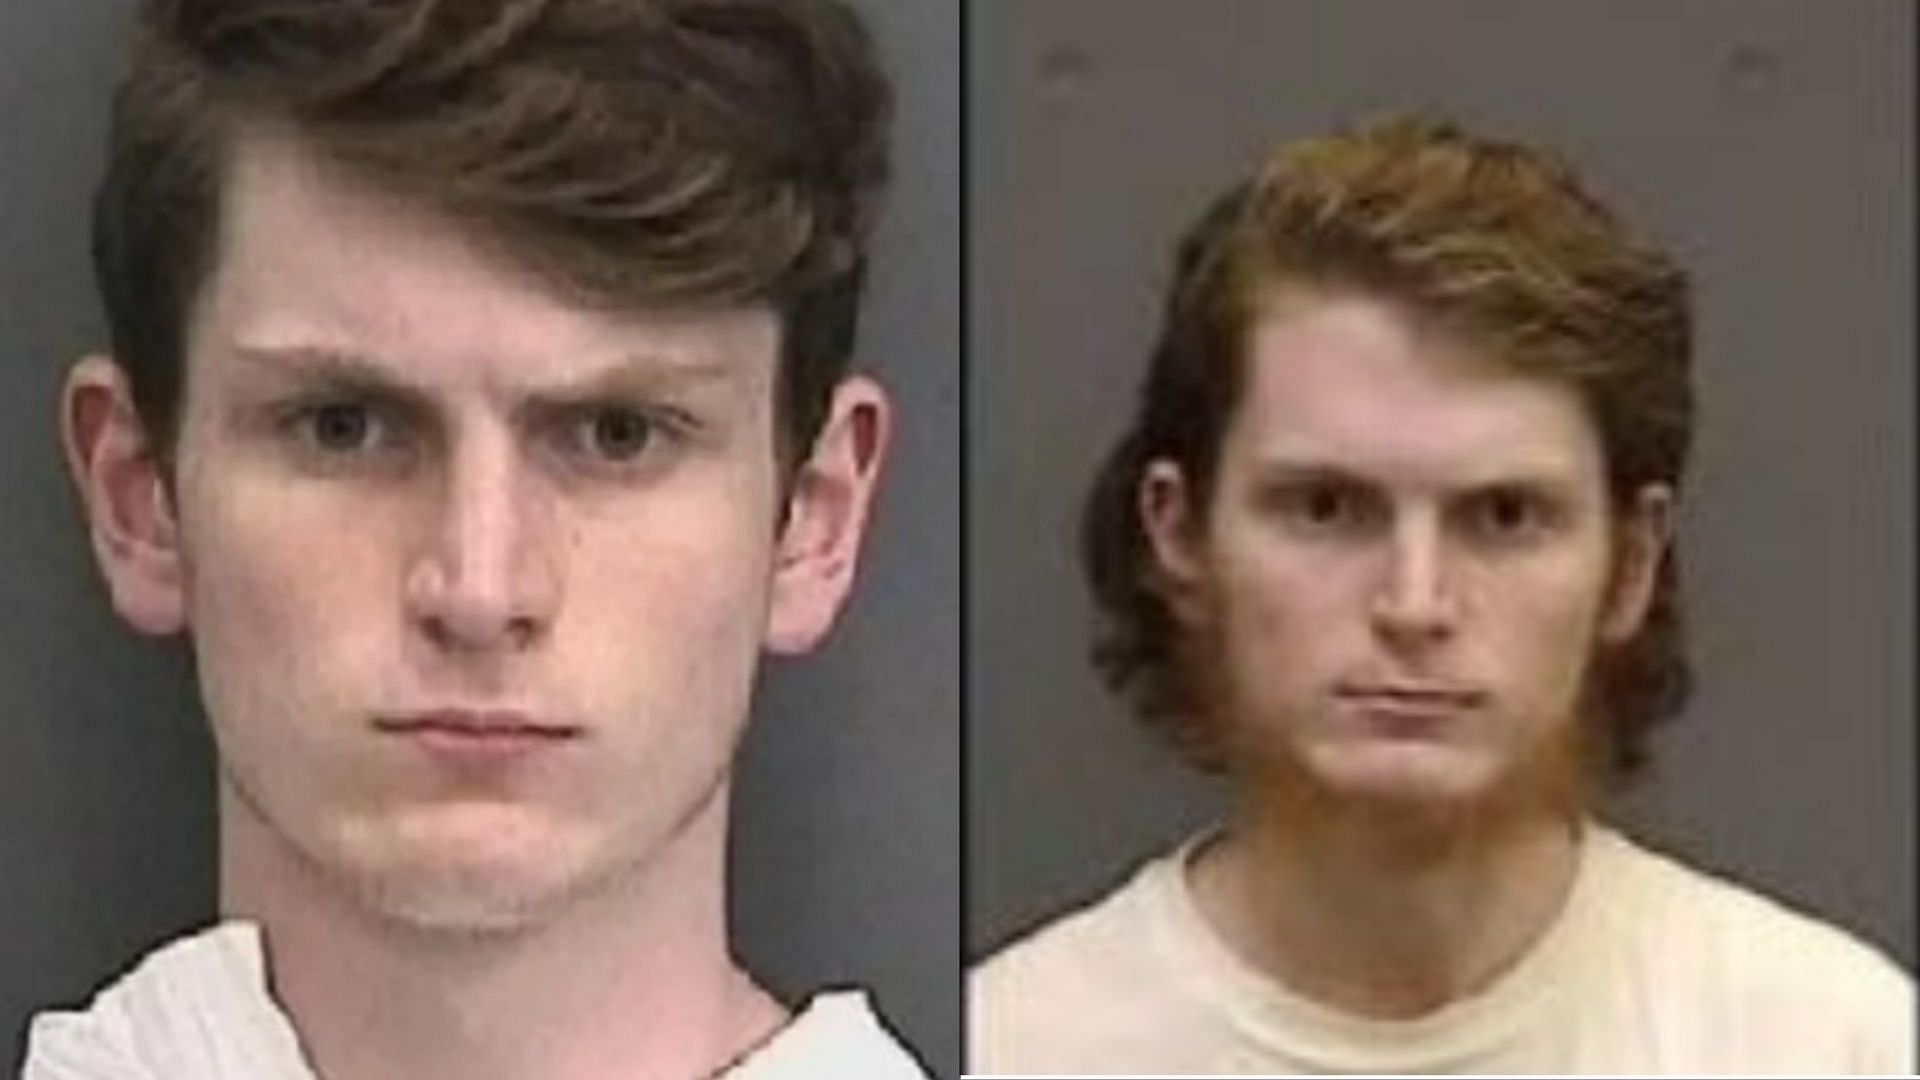 Devon Arthurs pleads guilty to killing &quot;neo-nazi&quot; roommates in 2017 (Image via Tampa Police/Twitter)